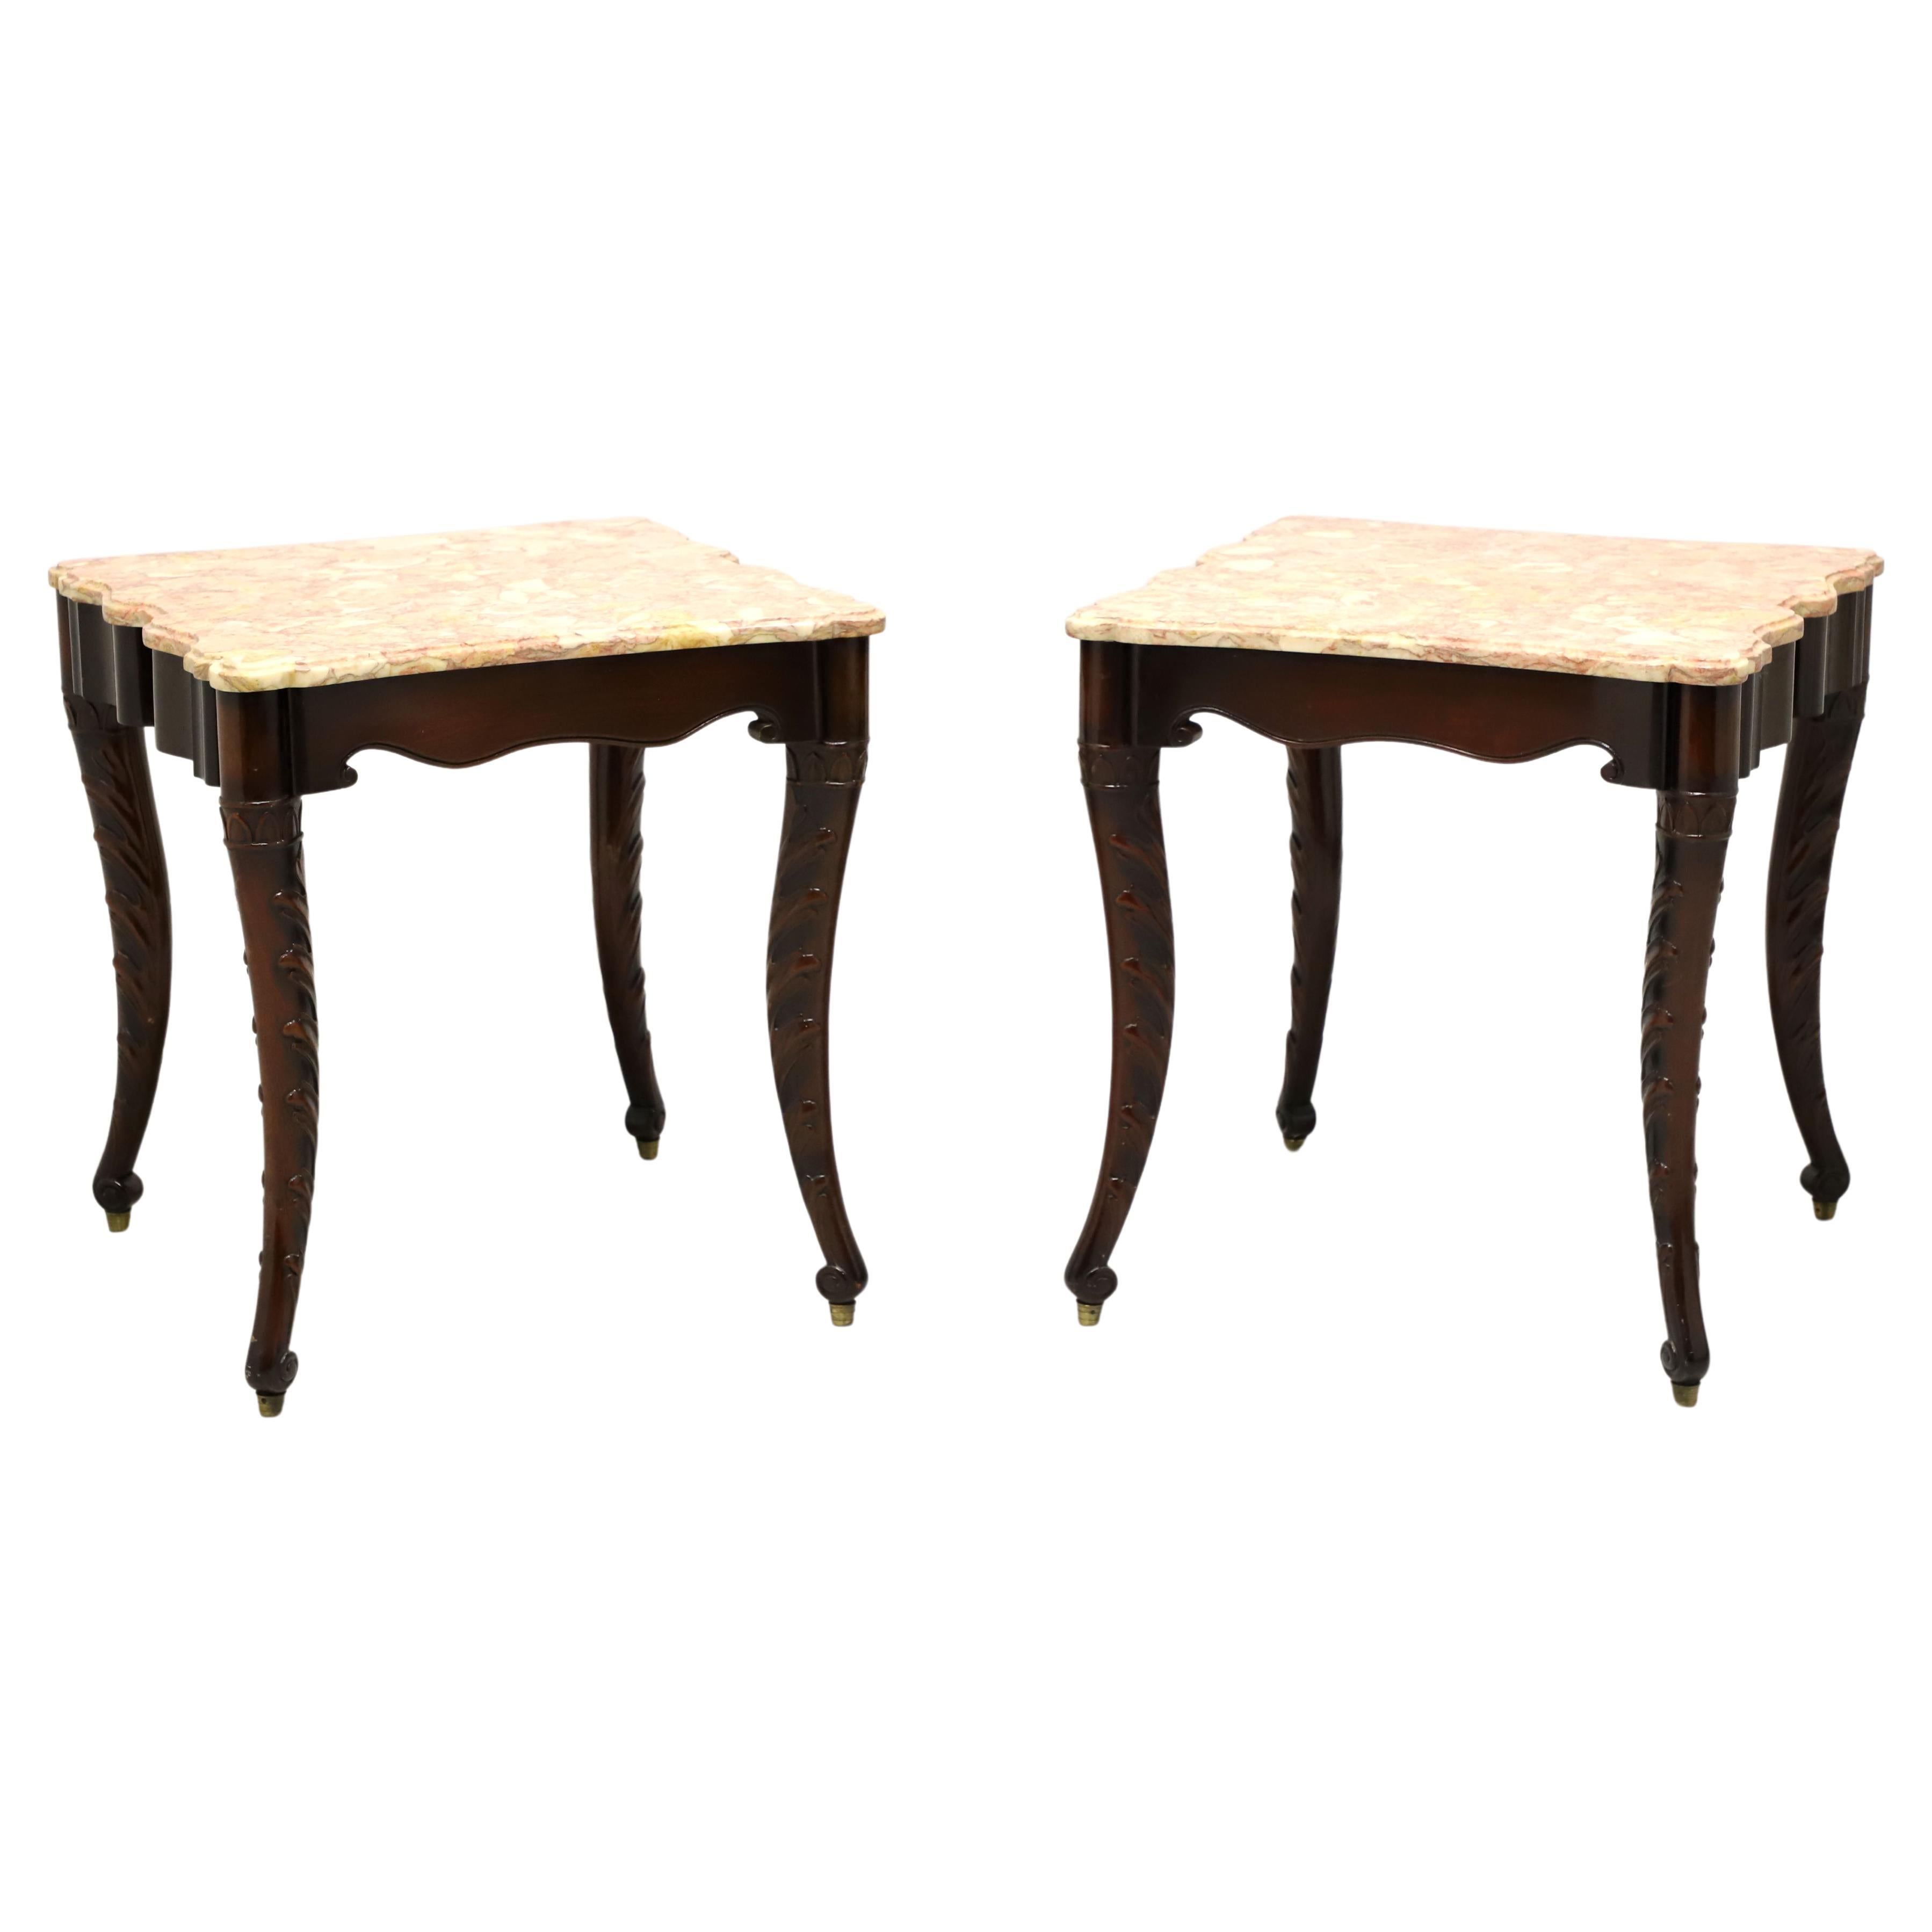 Mid 20th Century Carved Mahogany Marble Top Regency Large Side Tables - Pair For Sale